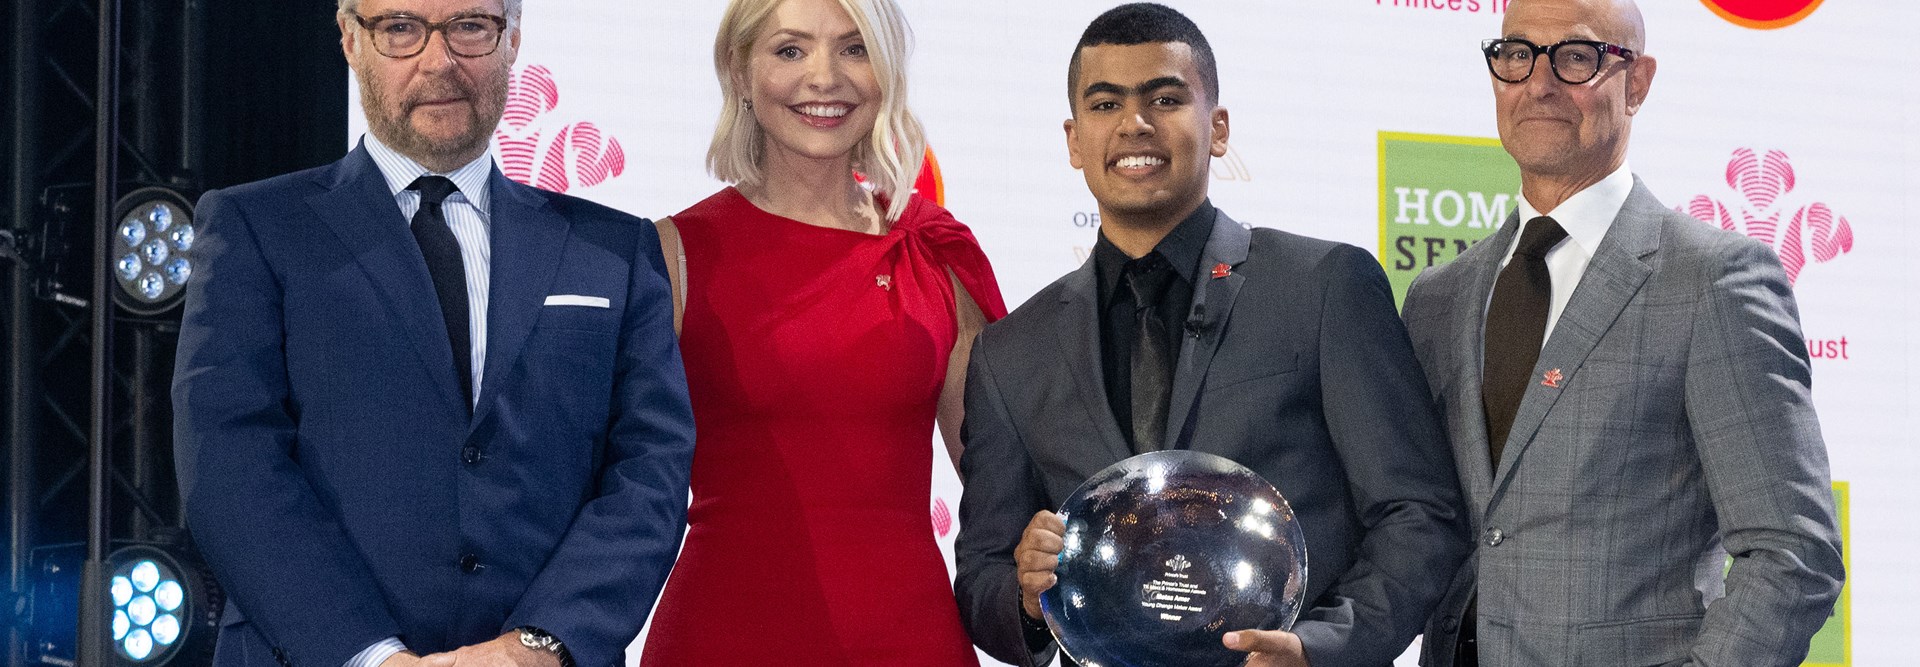 Brian Duffy, Holly Willoughby, And Stanley Tucci With The Winner Of The Watches Of Switzerland Young Change Maker Award Motaz